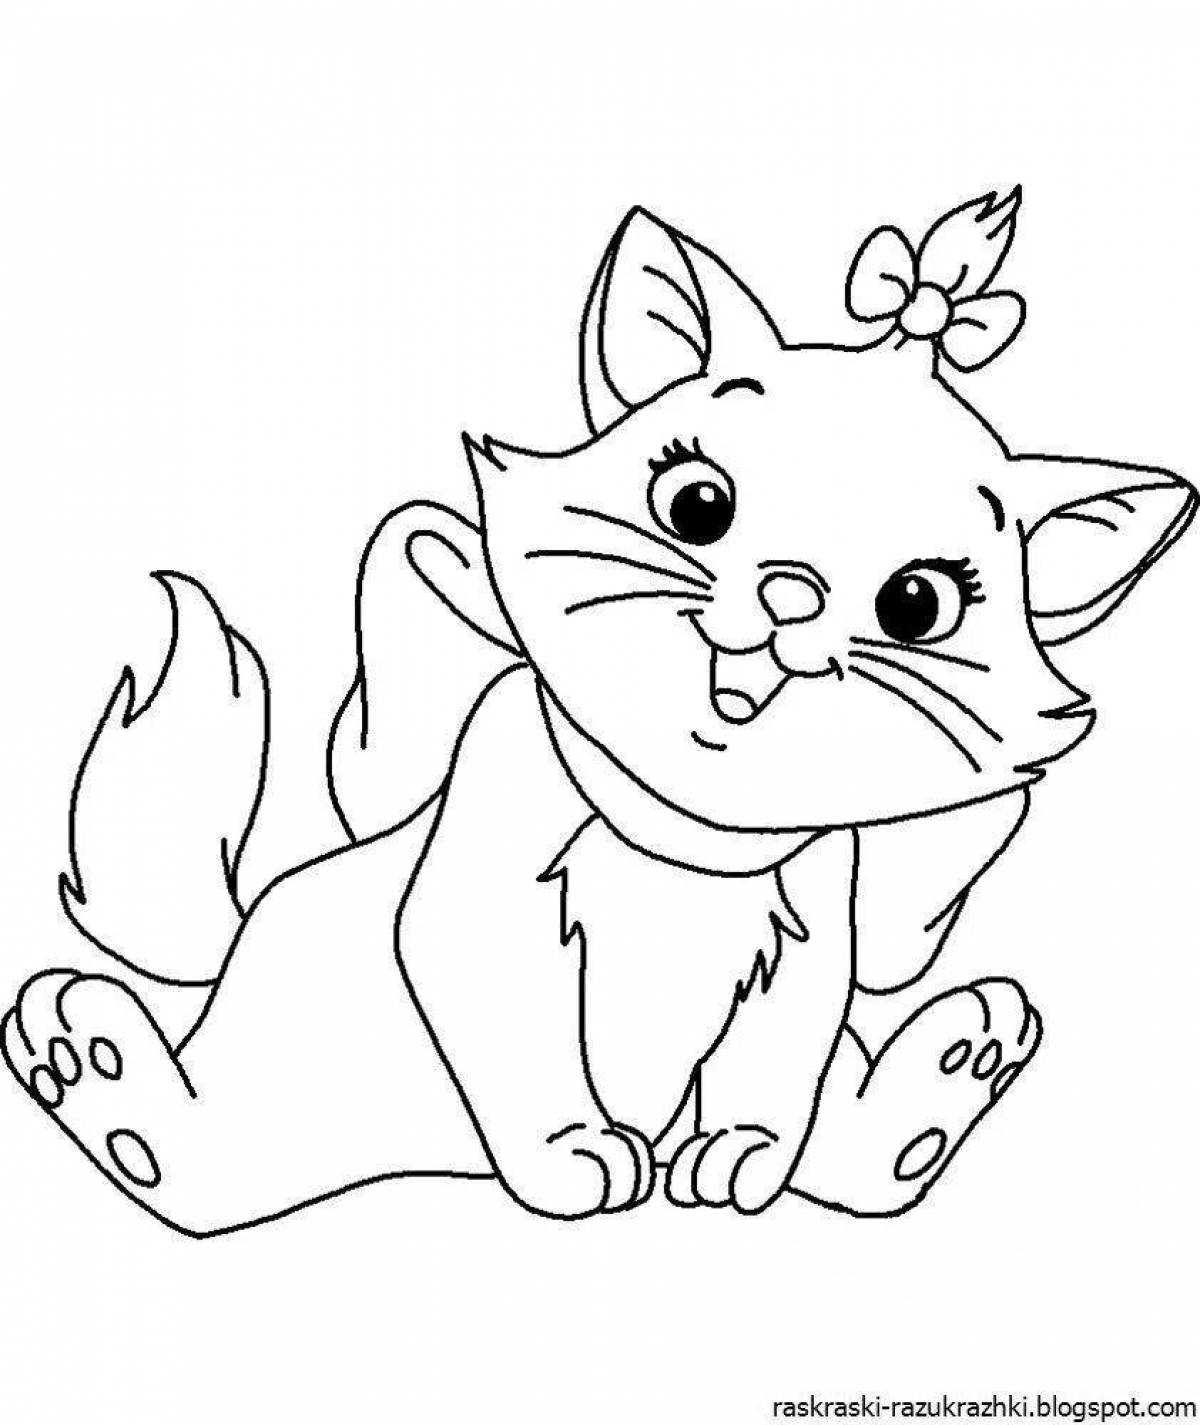 Kitty humorous coloring book for kids